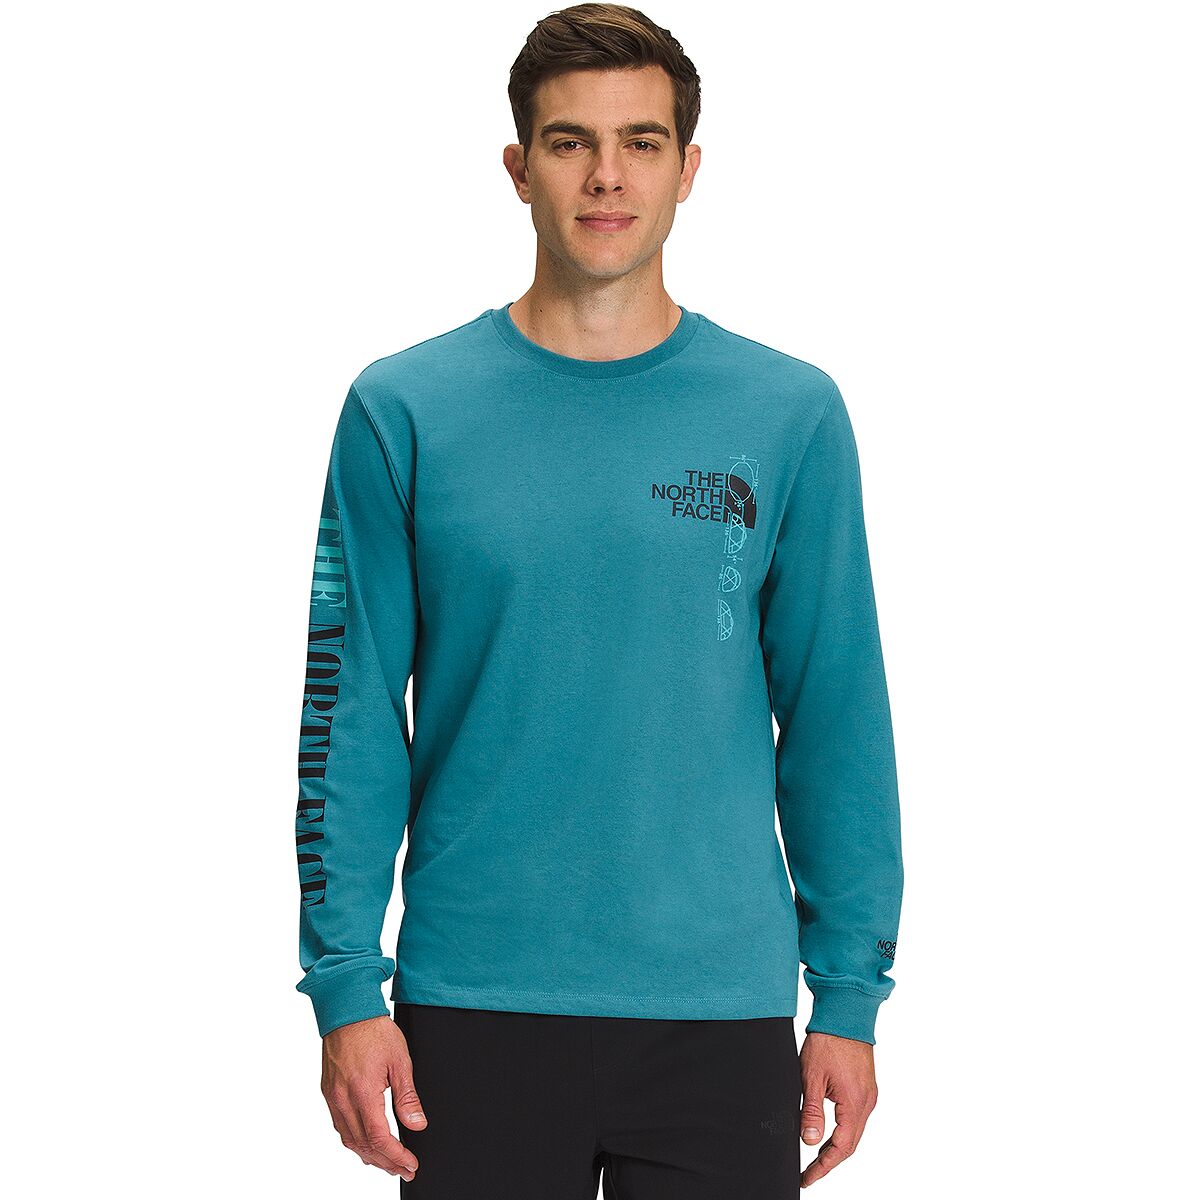 The North Face Recycled Expedition Graphic Long-Sleeve T-Shirt - Men's